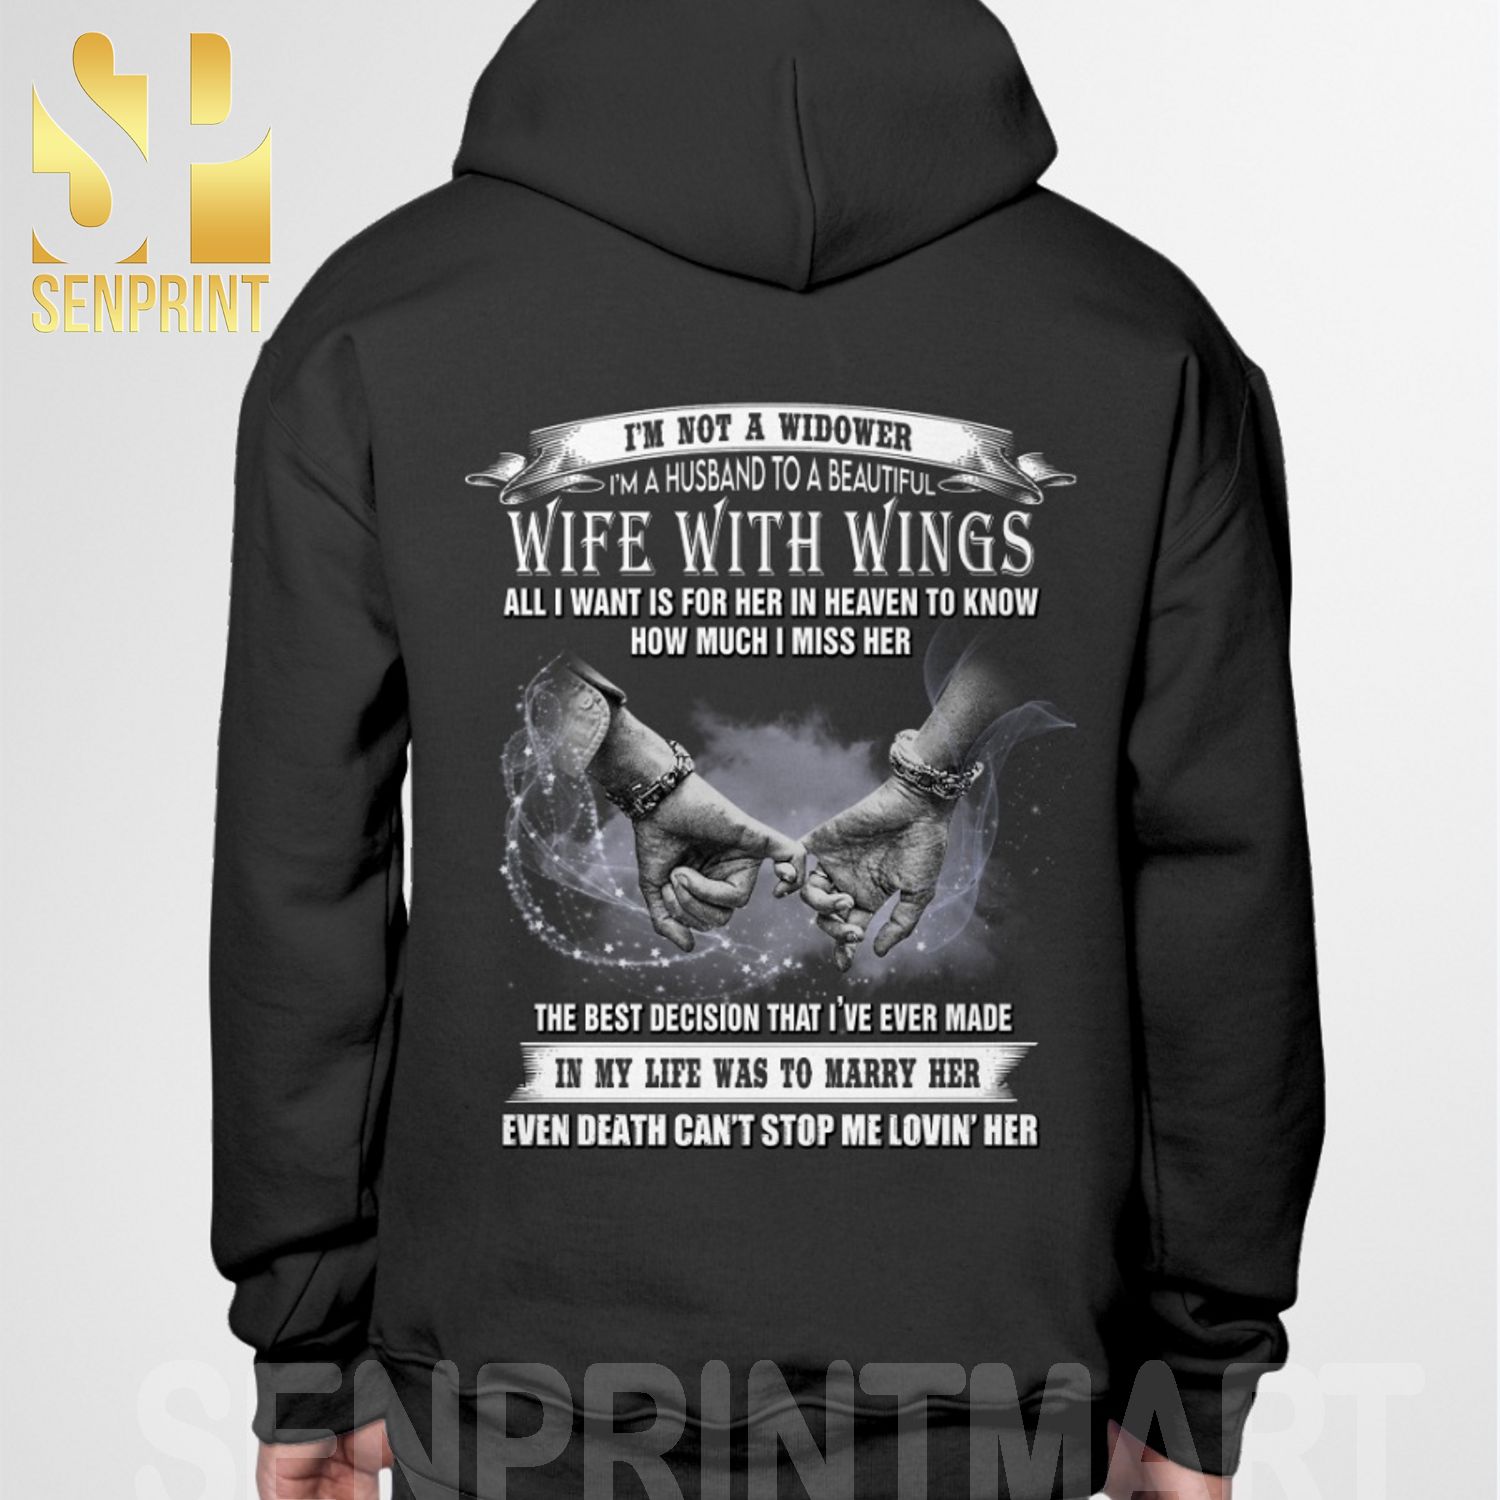 Iam A Husband To A Beautiful Wife With Wings 3D Full Printing Shirt